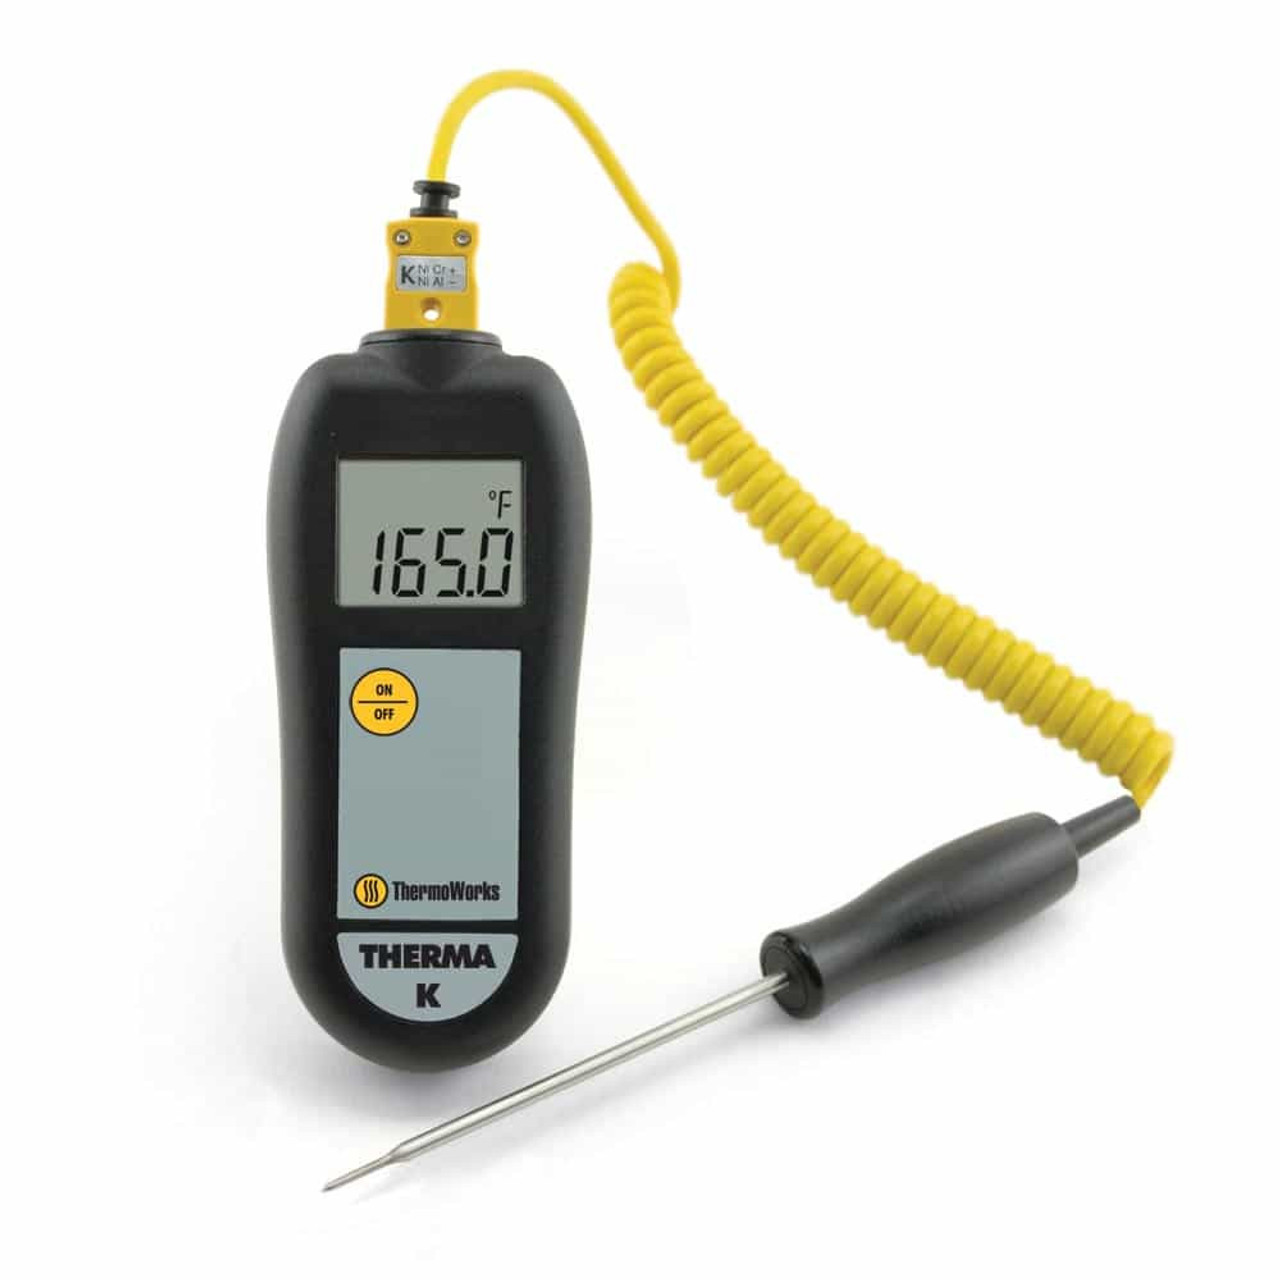 RS PRO, RS PRO Thermocouple Barcode Scanning Digital Thermometer for HVAC,  Industrial Use, E, J, K, N, R, S, T Probe, 1, 204-8411